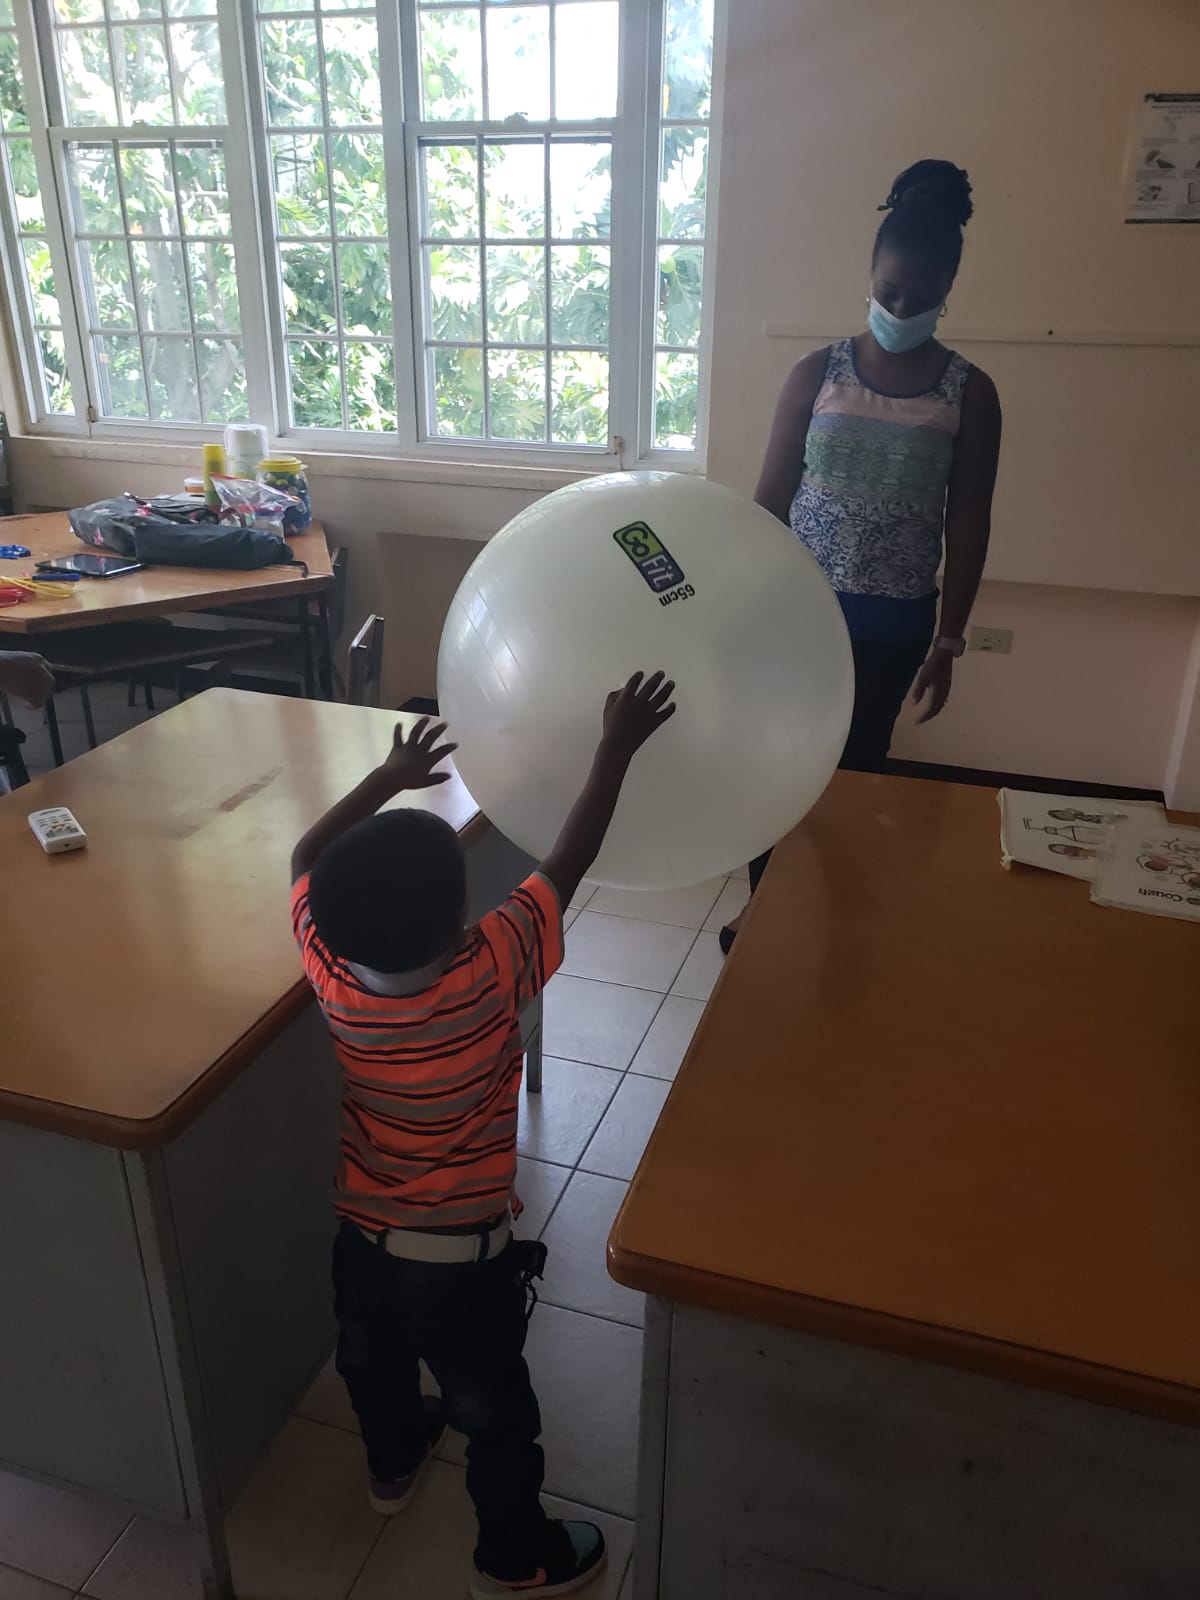 Small child working with occupational therapist